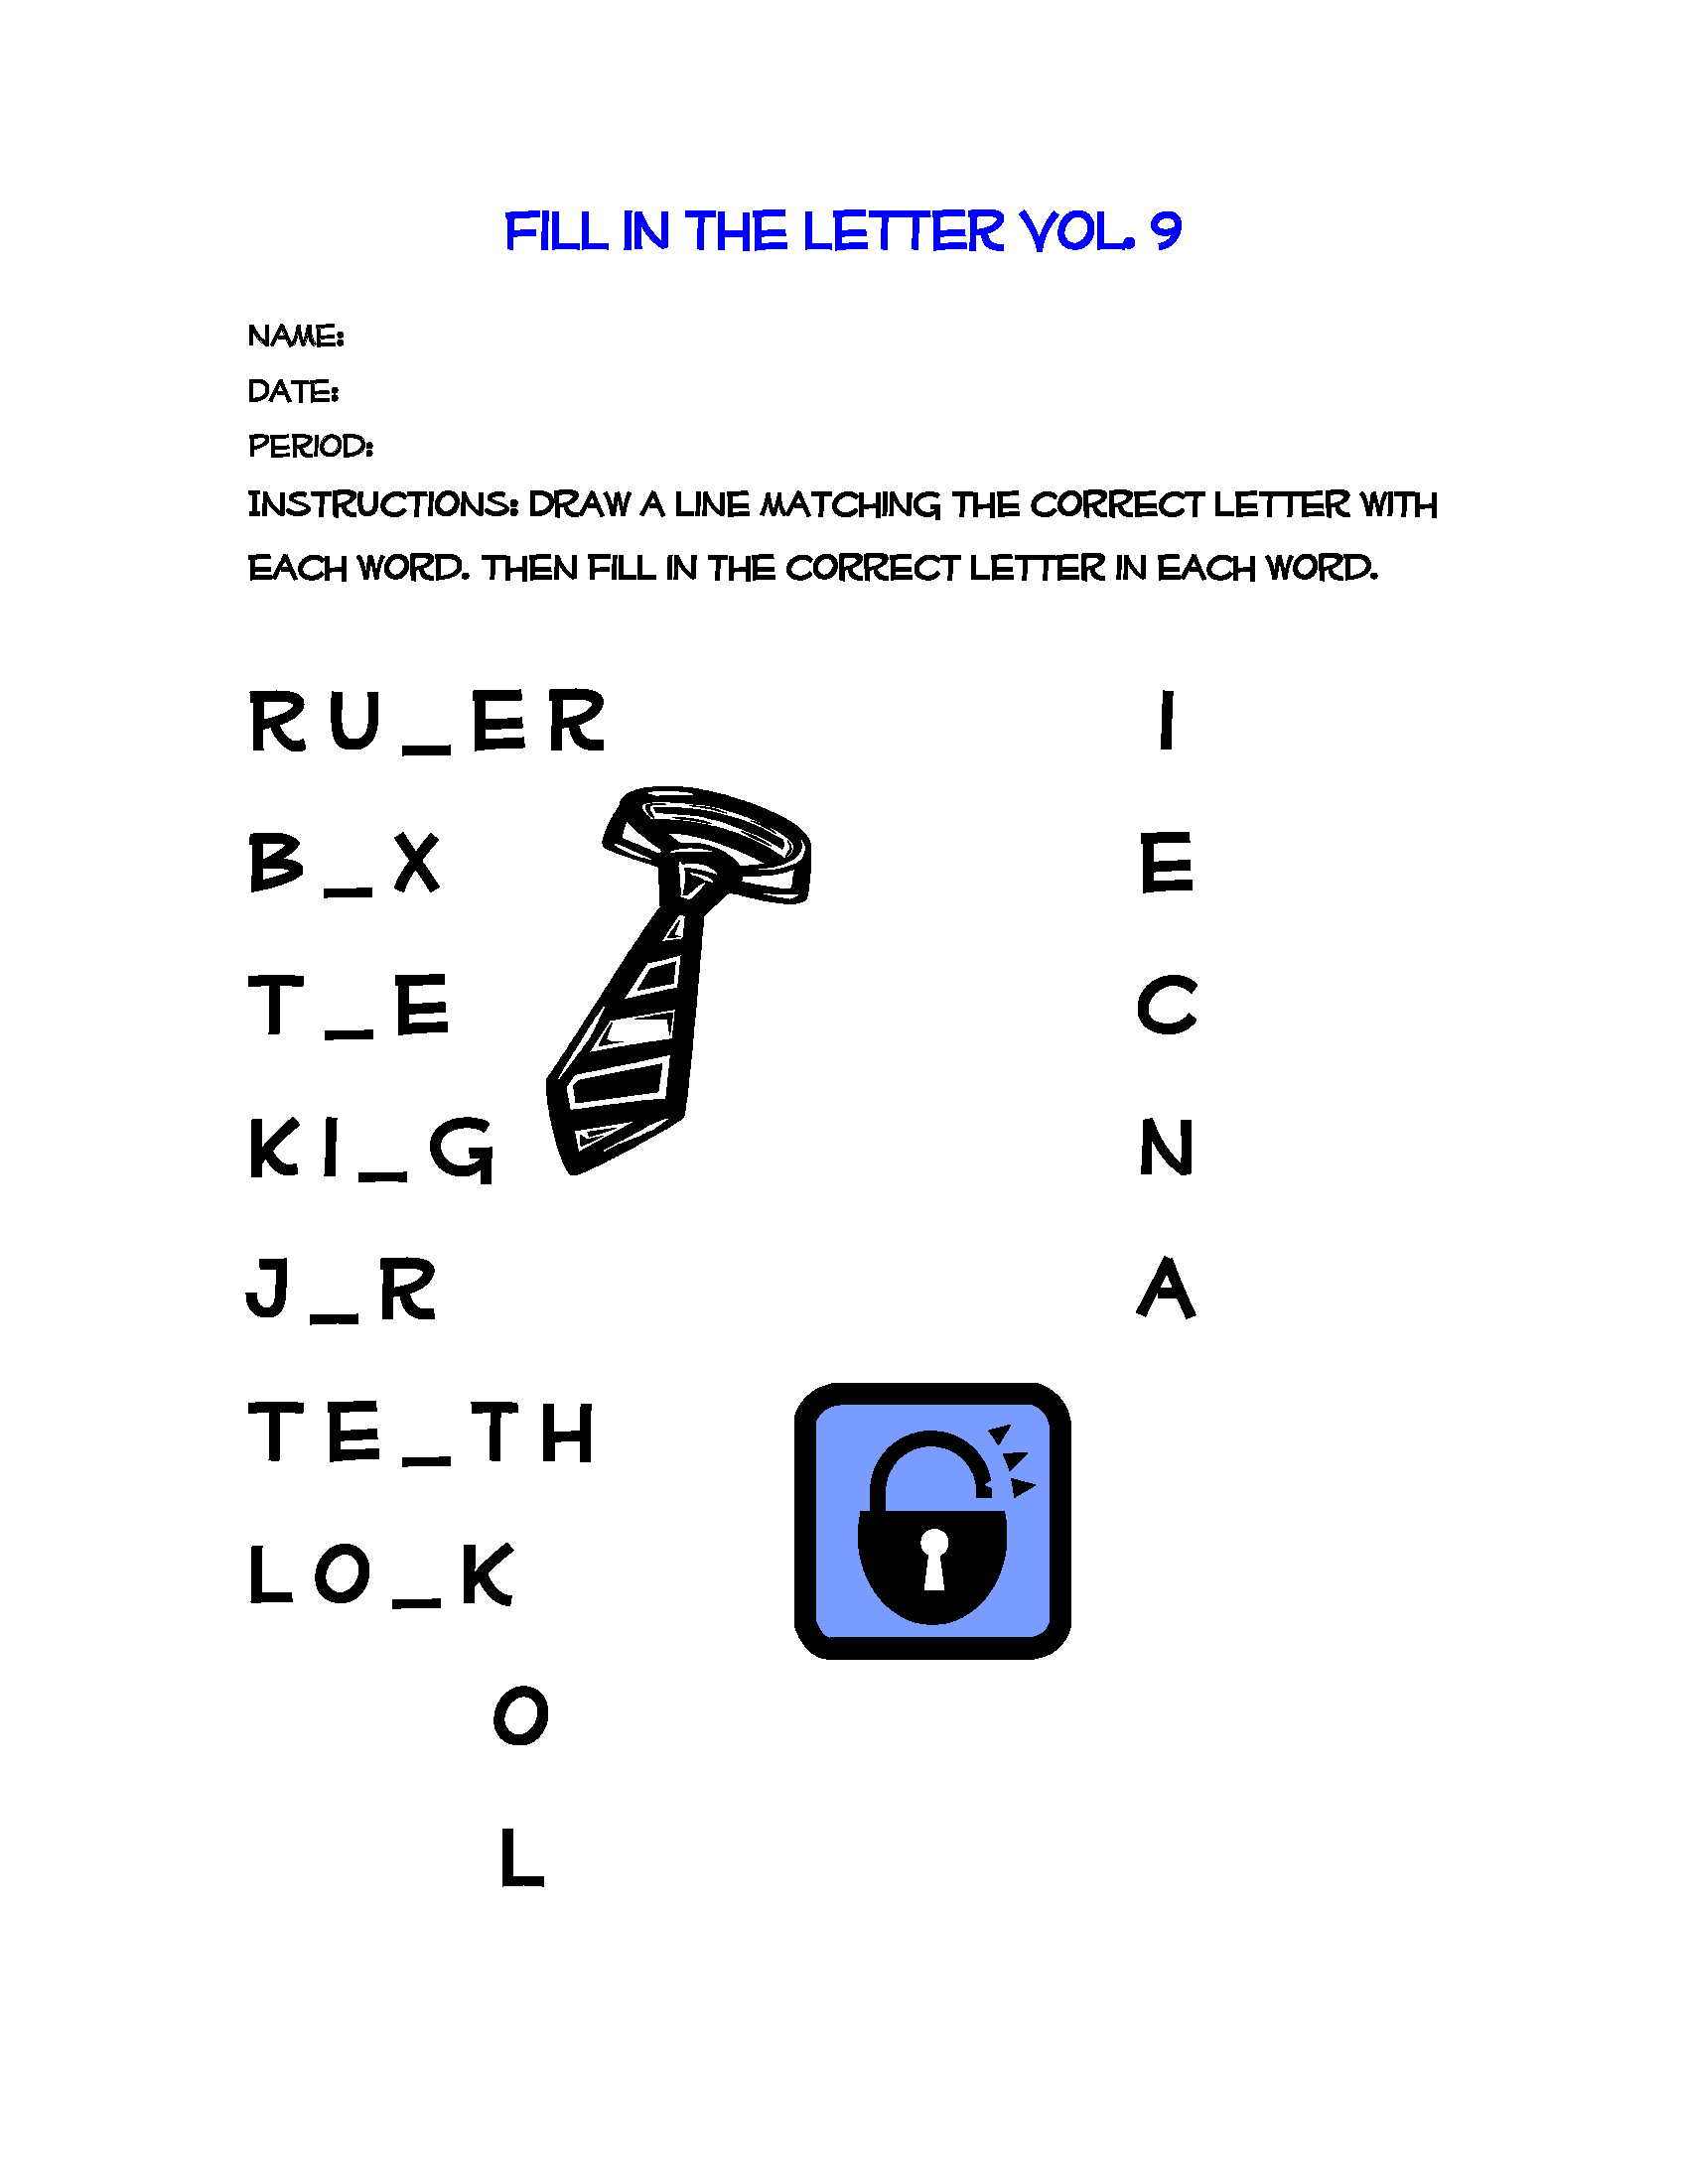 Fill in the letter Vol 9